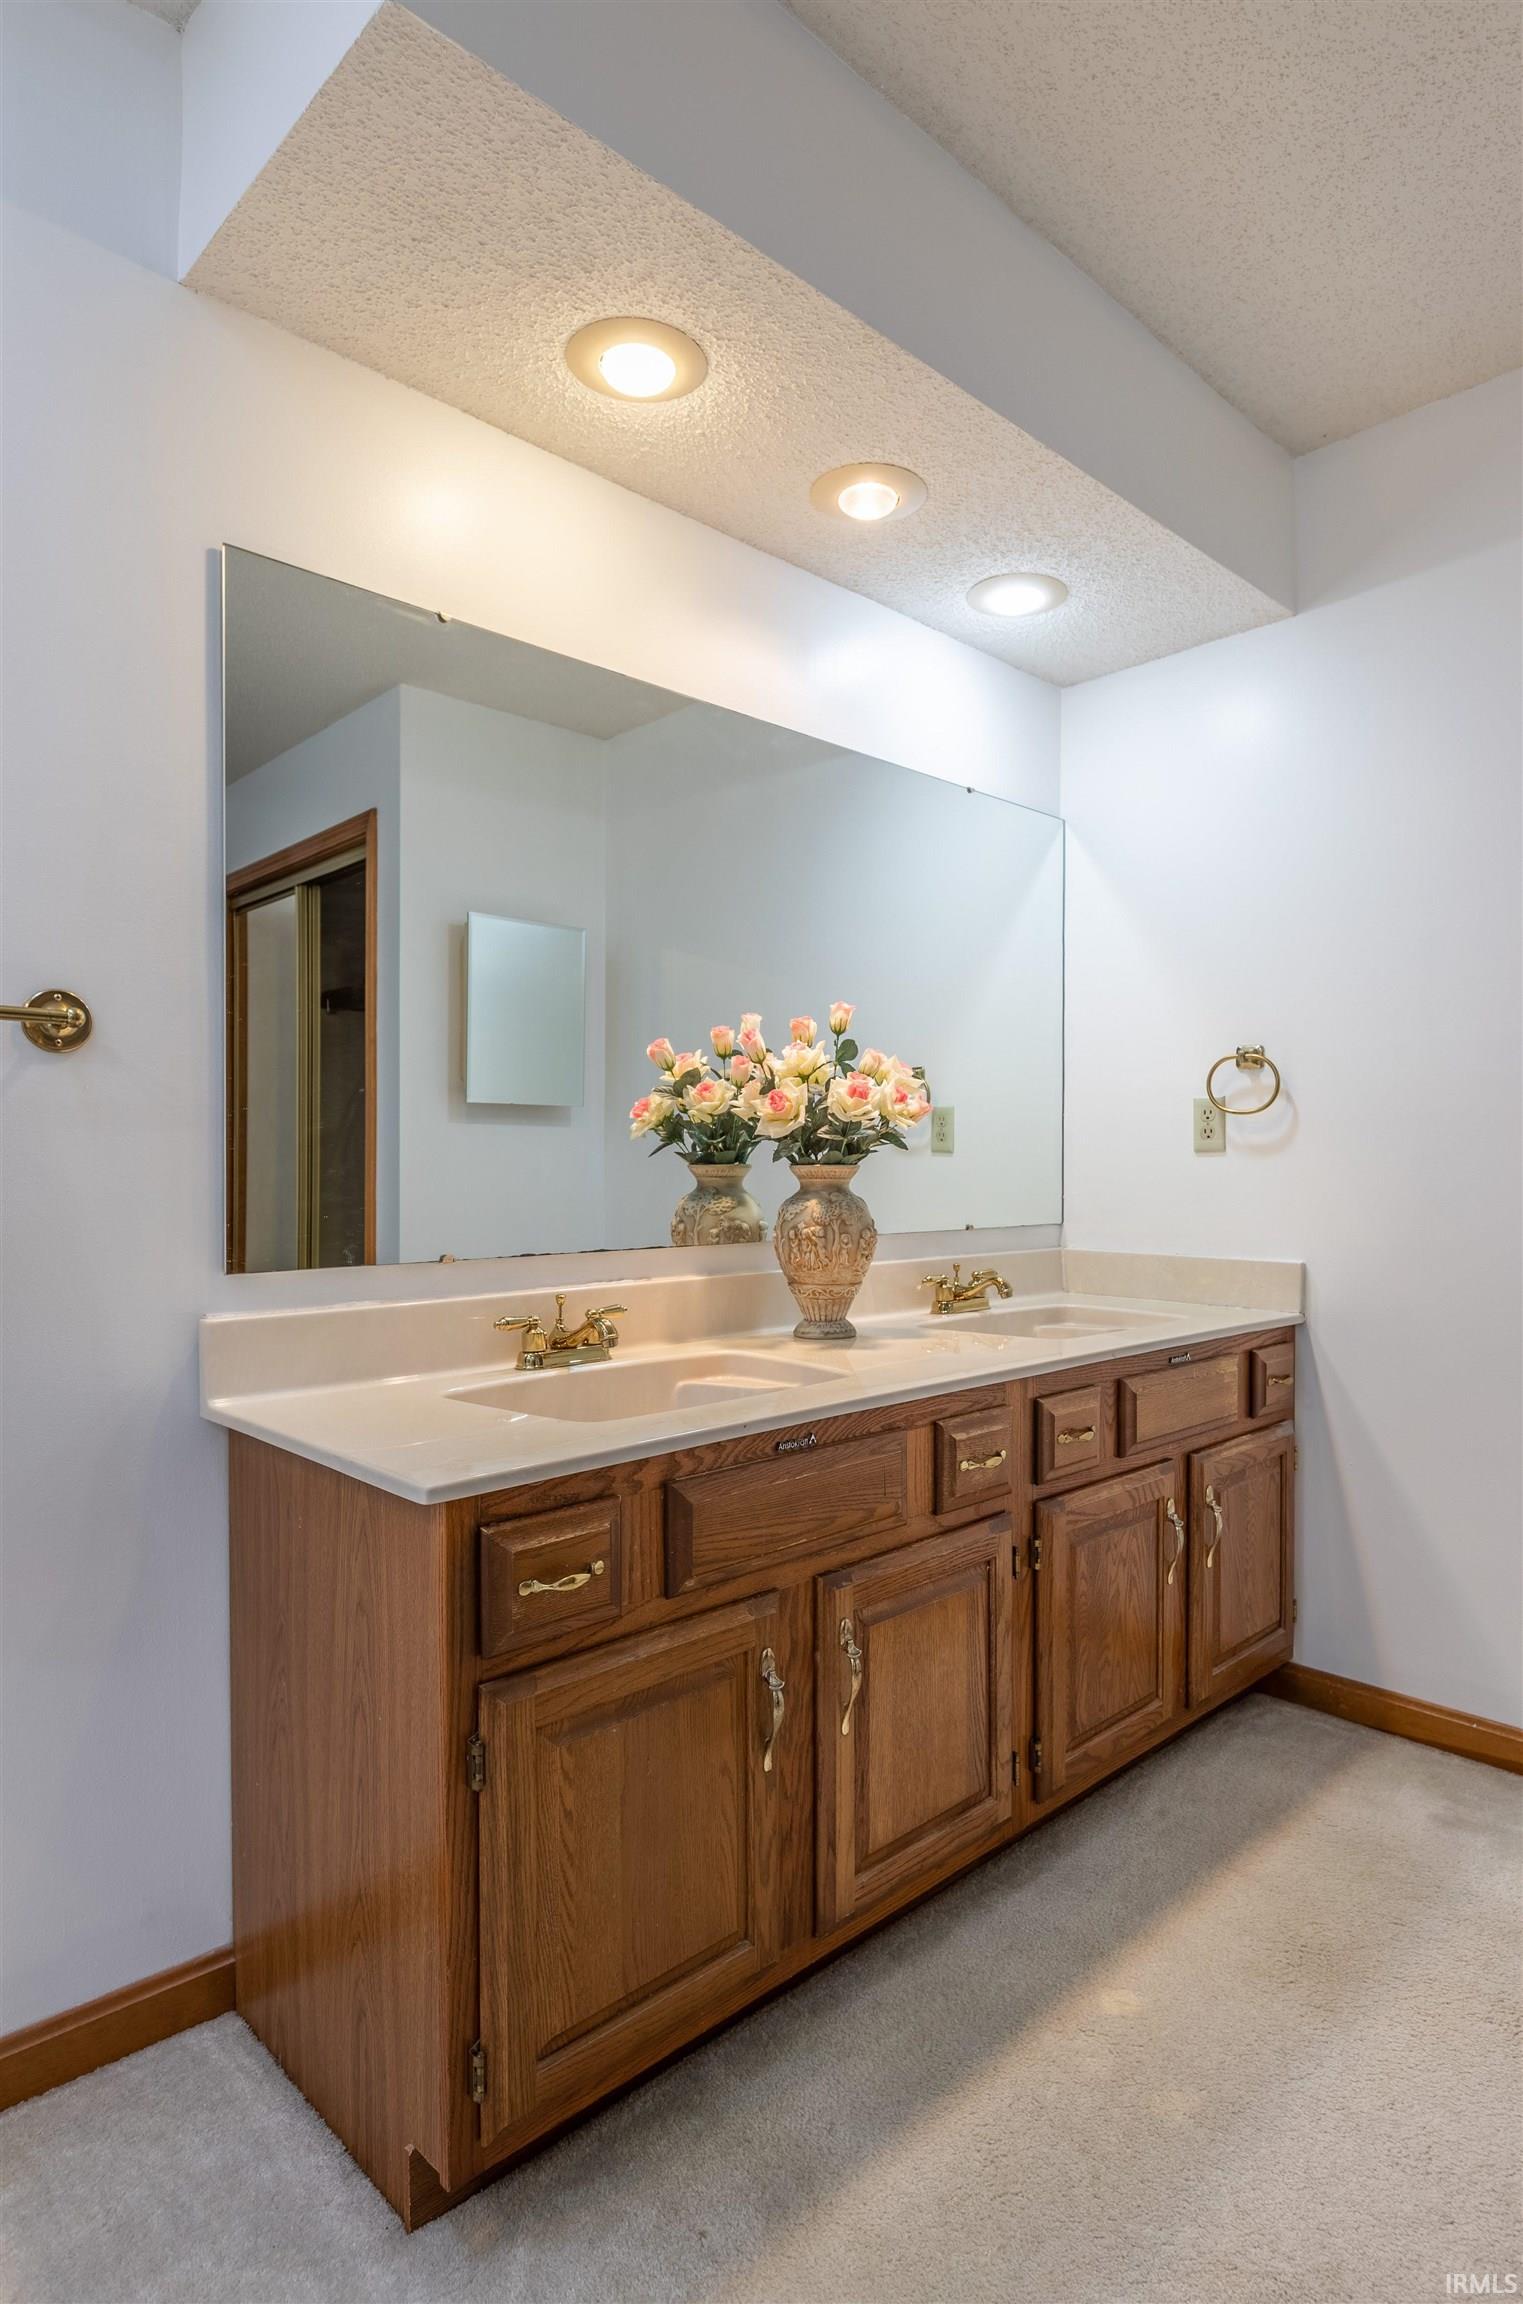 ...with Separate Step-In Shower, Skylight, Dual Vanity, Linen Closet, Mirrored Medicine Cabinet, and Jetted Tub